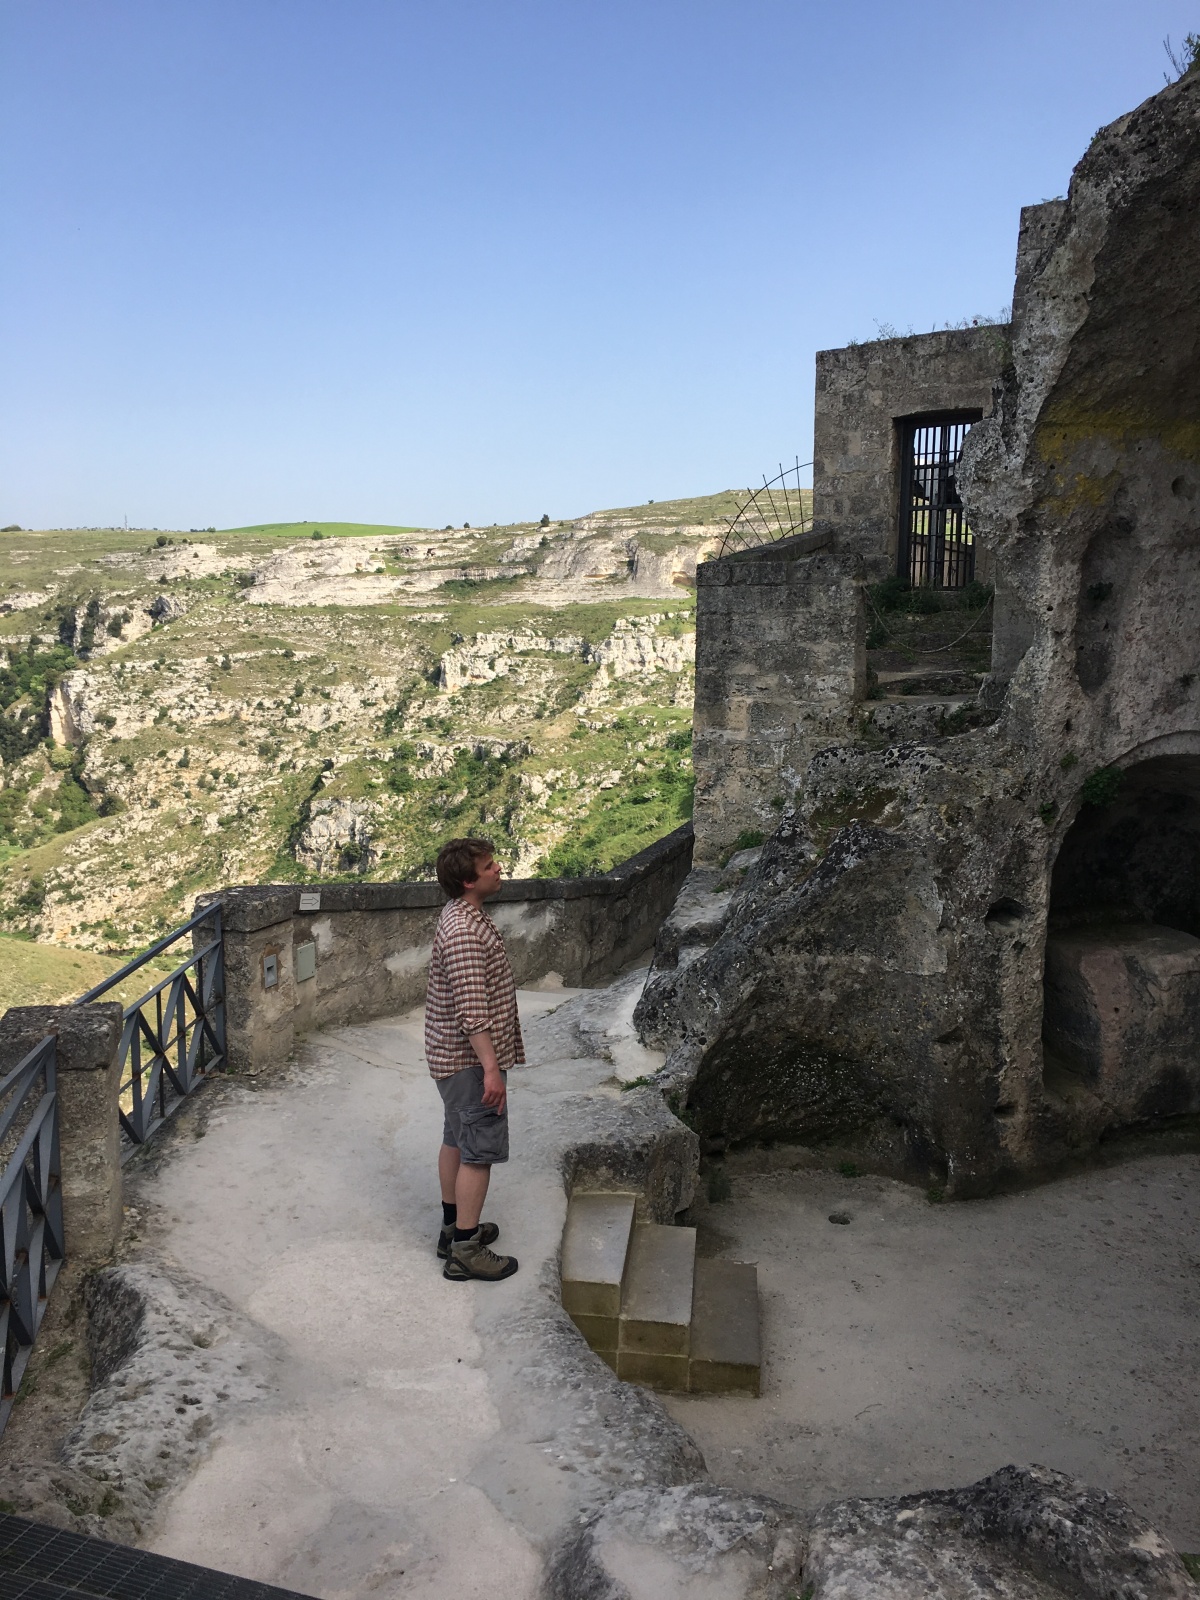 Matera: Where to stay, what to see and do in Matera. We visited on our Italian babymoon.